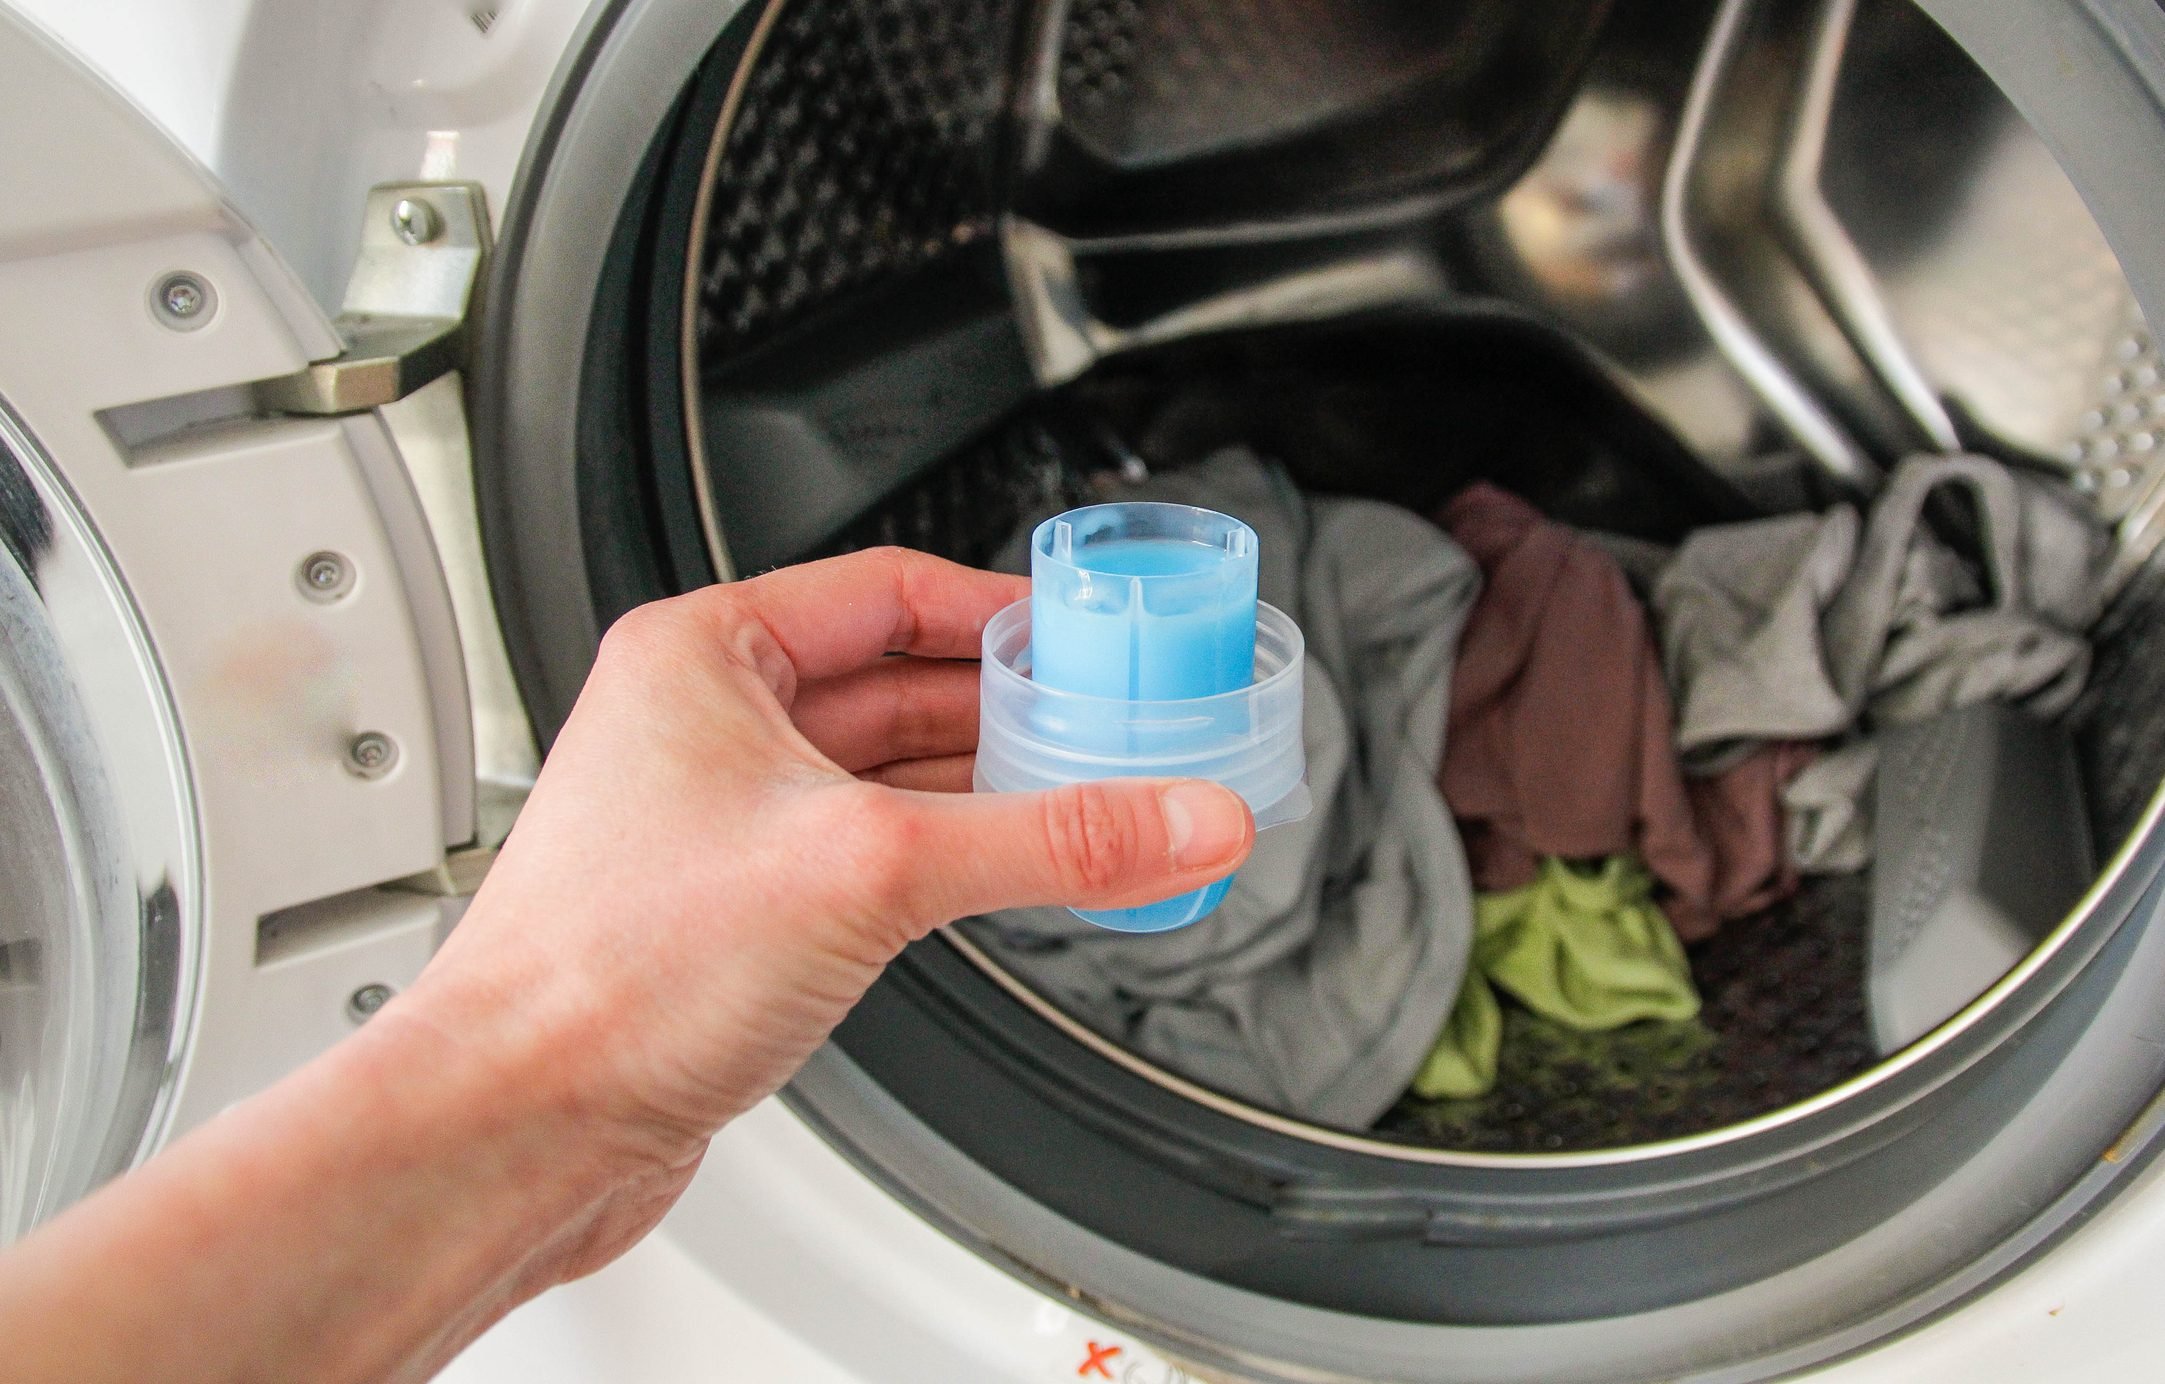 No Quarters, No Problem. Wash Your Laundry For Free This Weekend